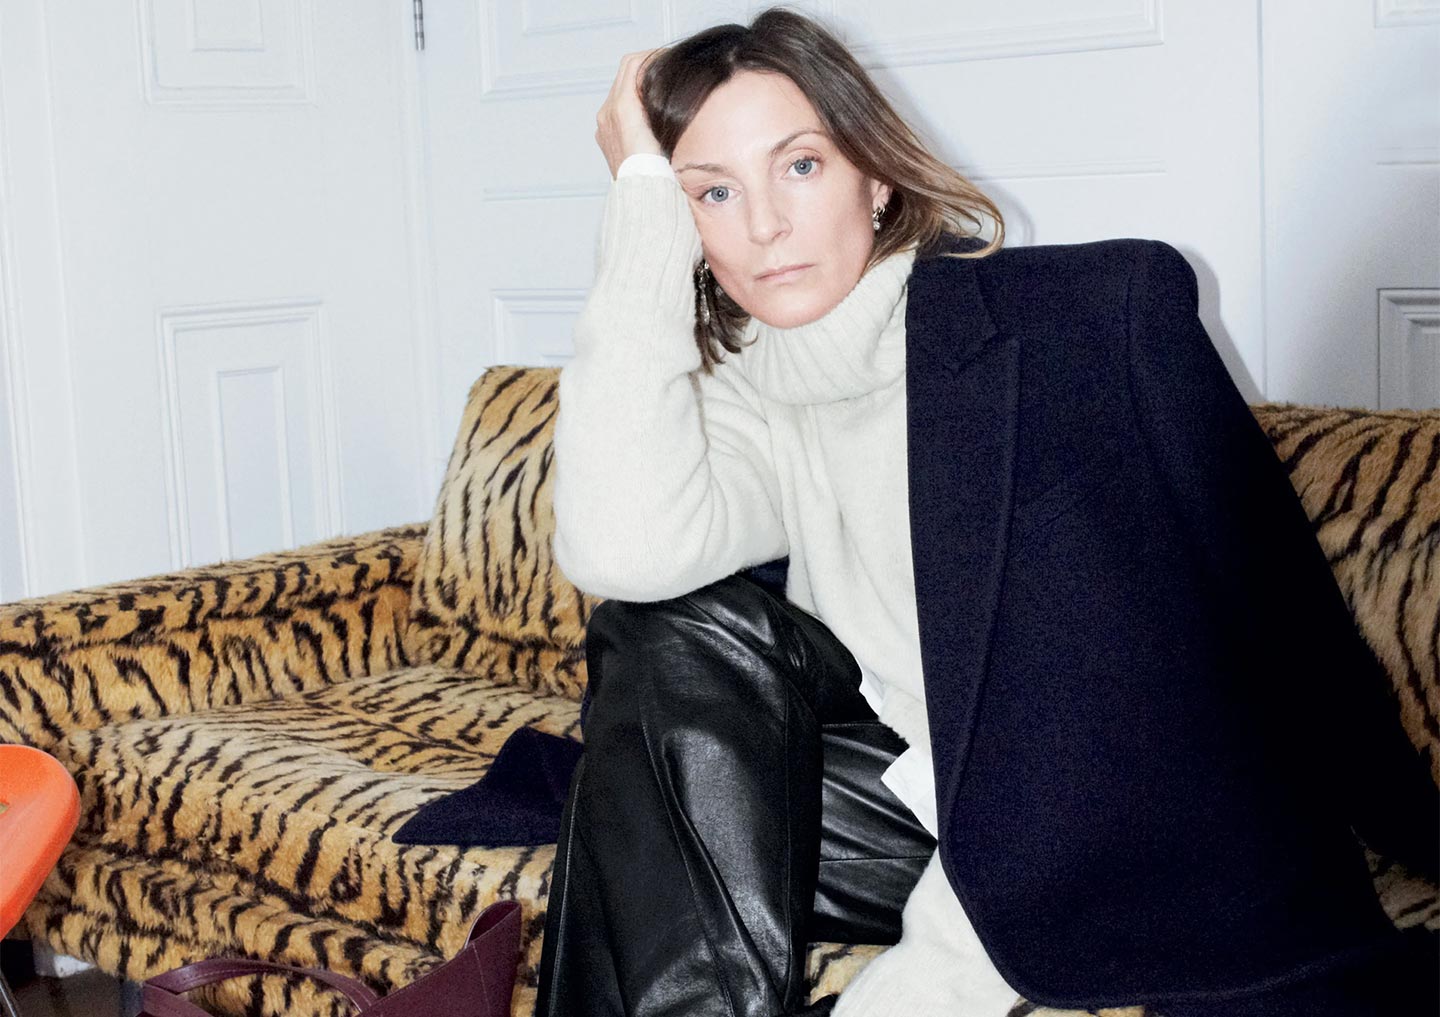 The first collection of British designer Phoebe Philo's eponymous brand will be unveiled and available on her website this September